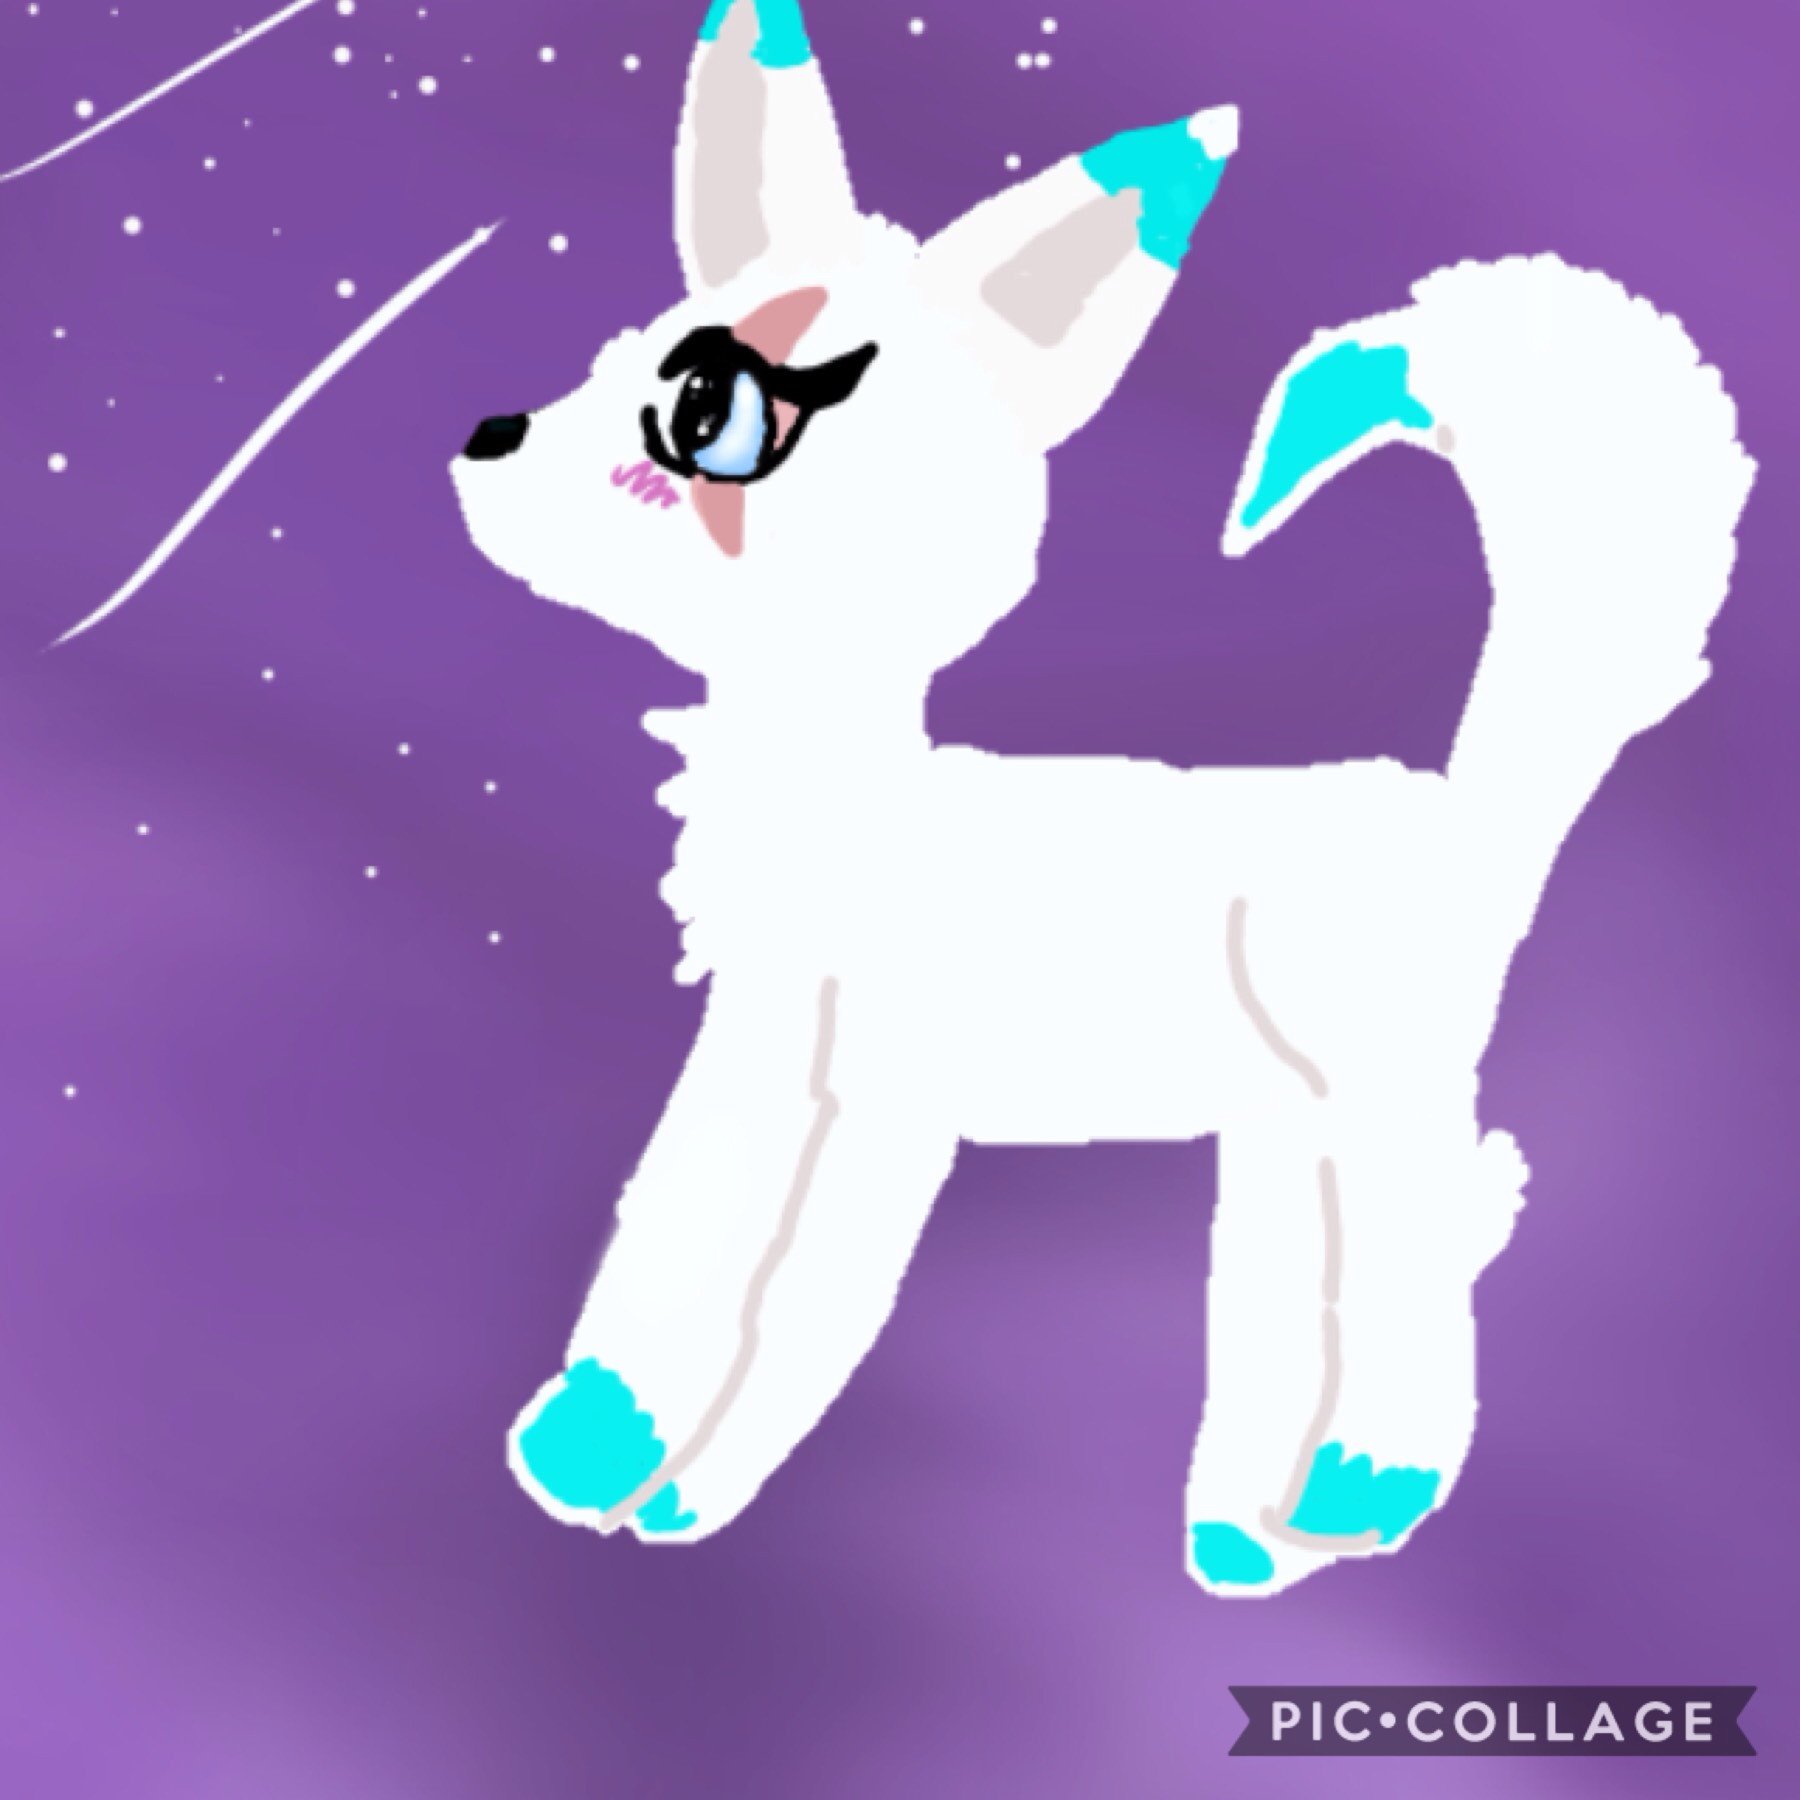 Tap for candy 🍬

Here *gives you starburst*
But really what do you think of this art? Personally this took me awhile to do the background so👍